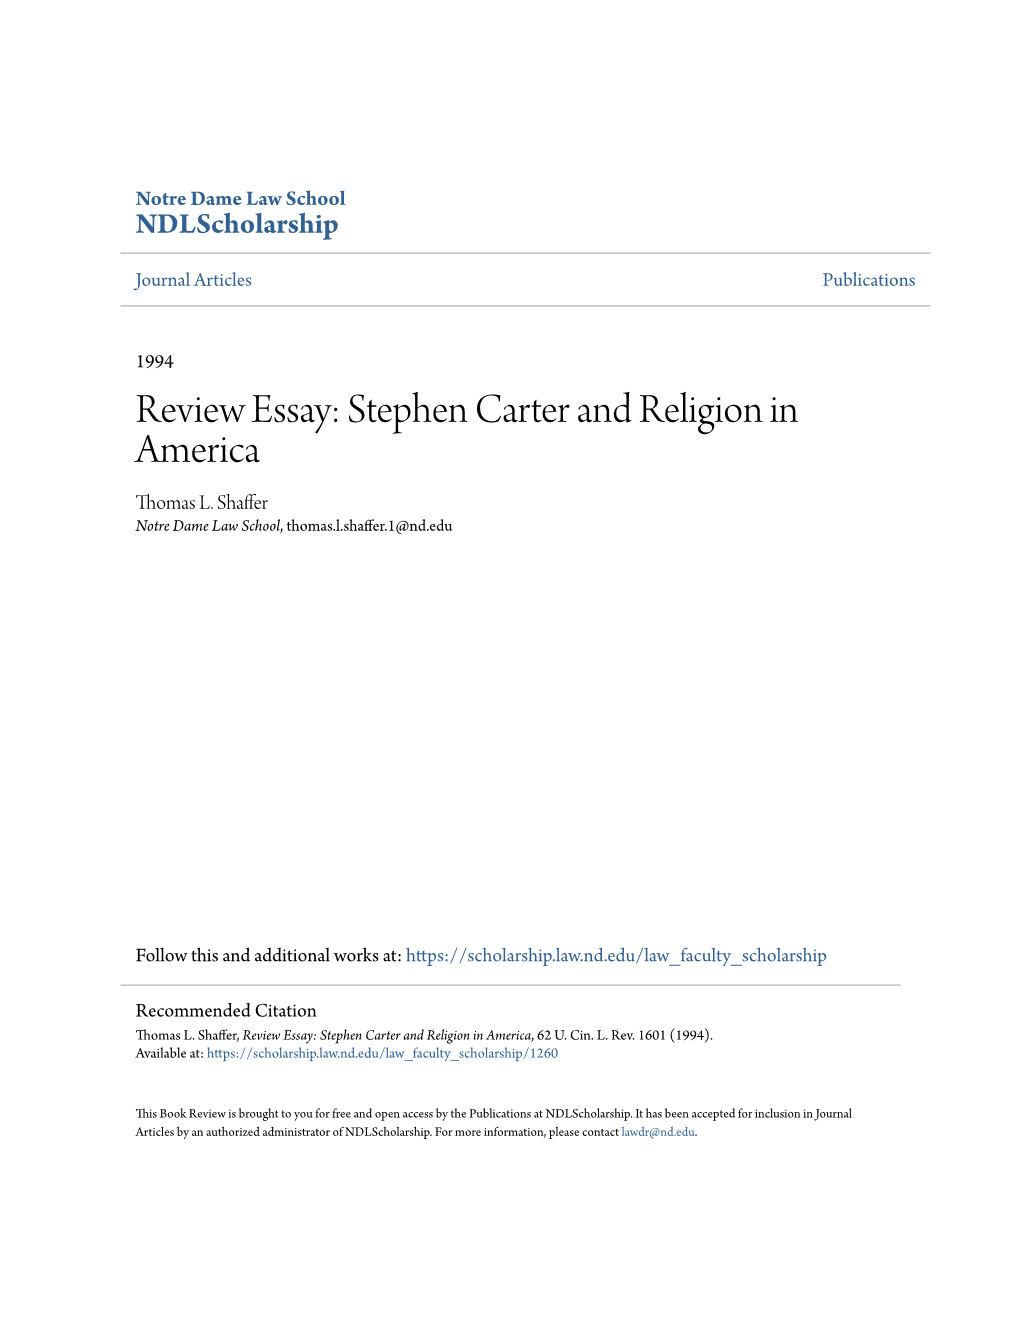 Stephen Carter and Religion in America Thomas L